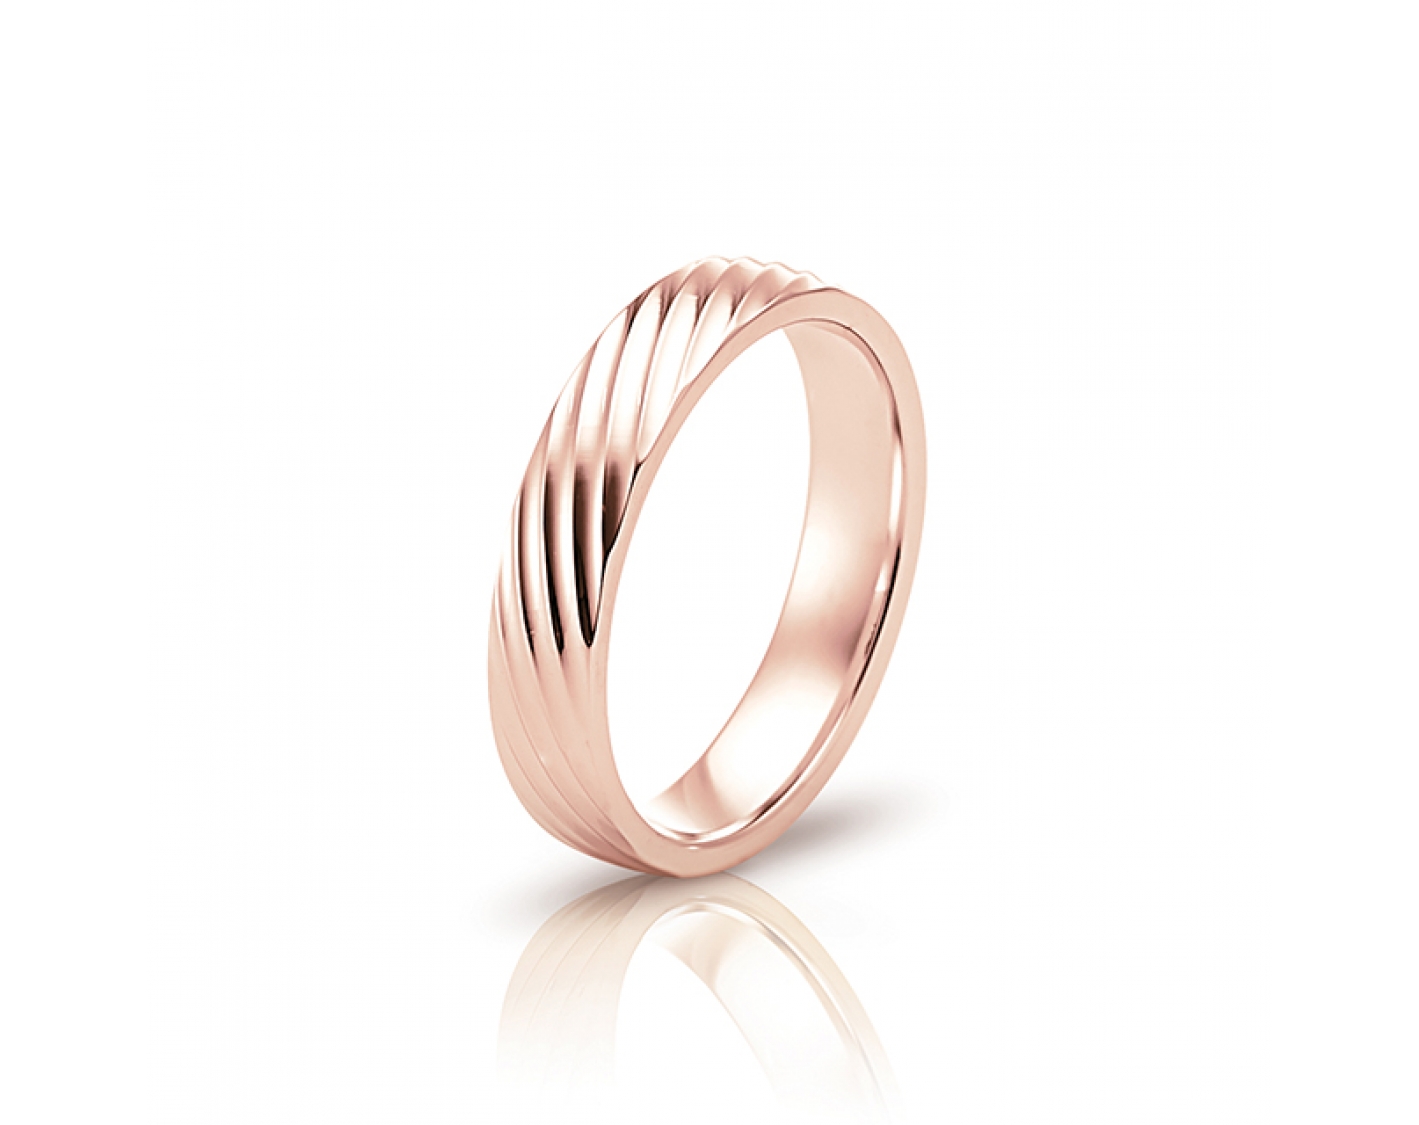 18k rose gold 5mm matte wedding band with shiny lines Photos & images